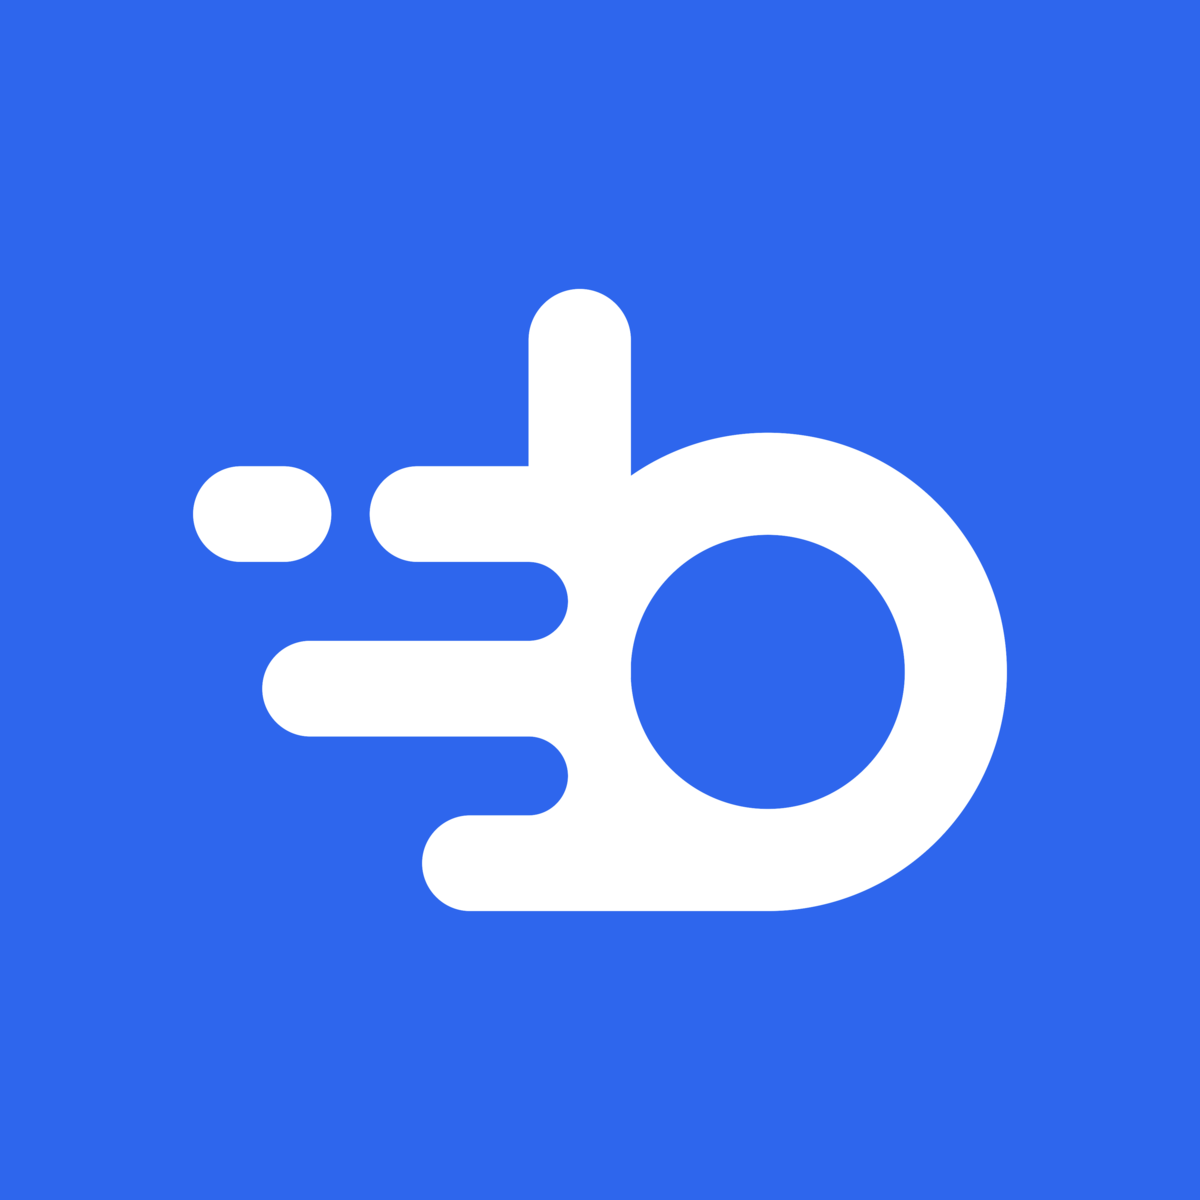 Burq: On‑Demand Delivery Shopify App